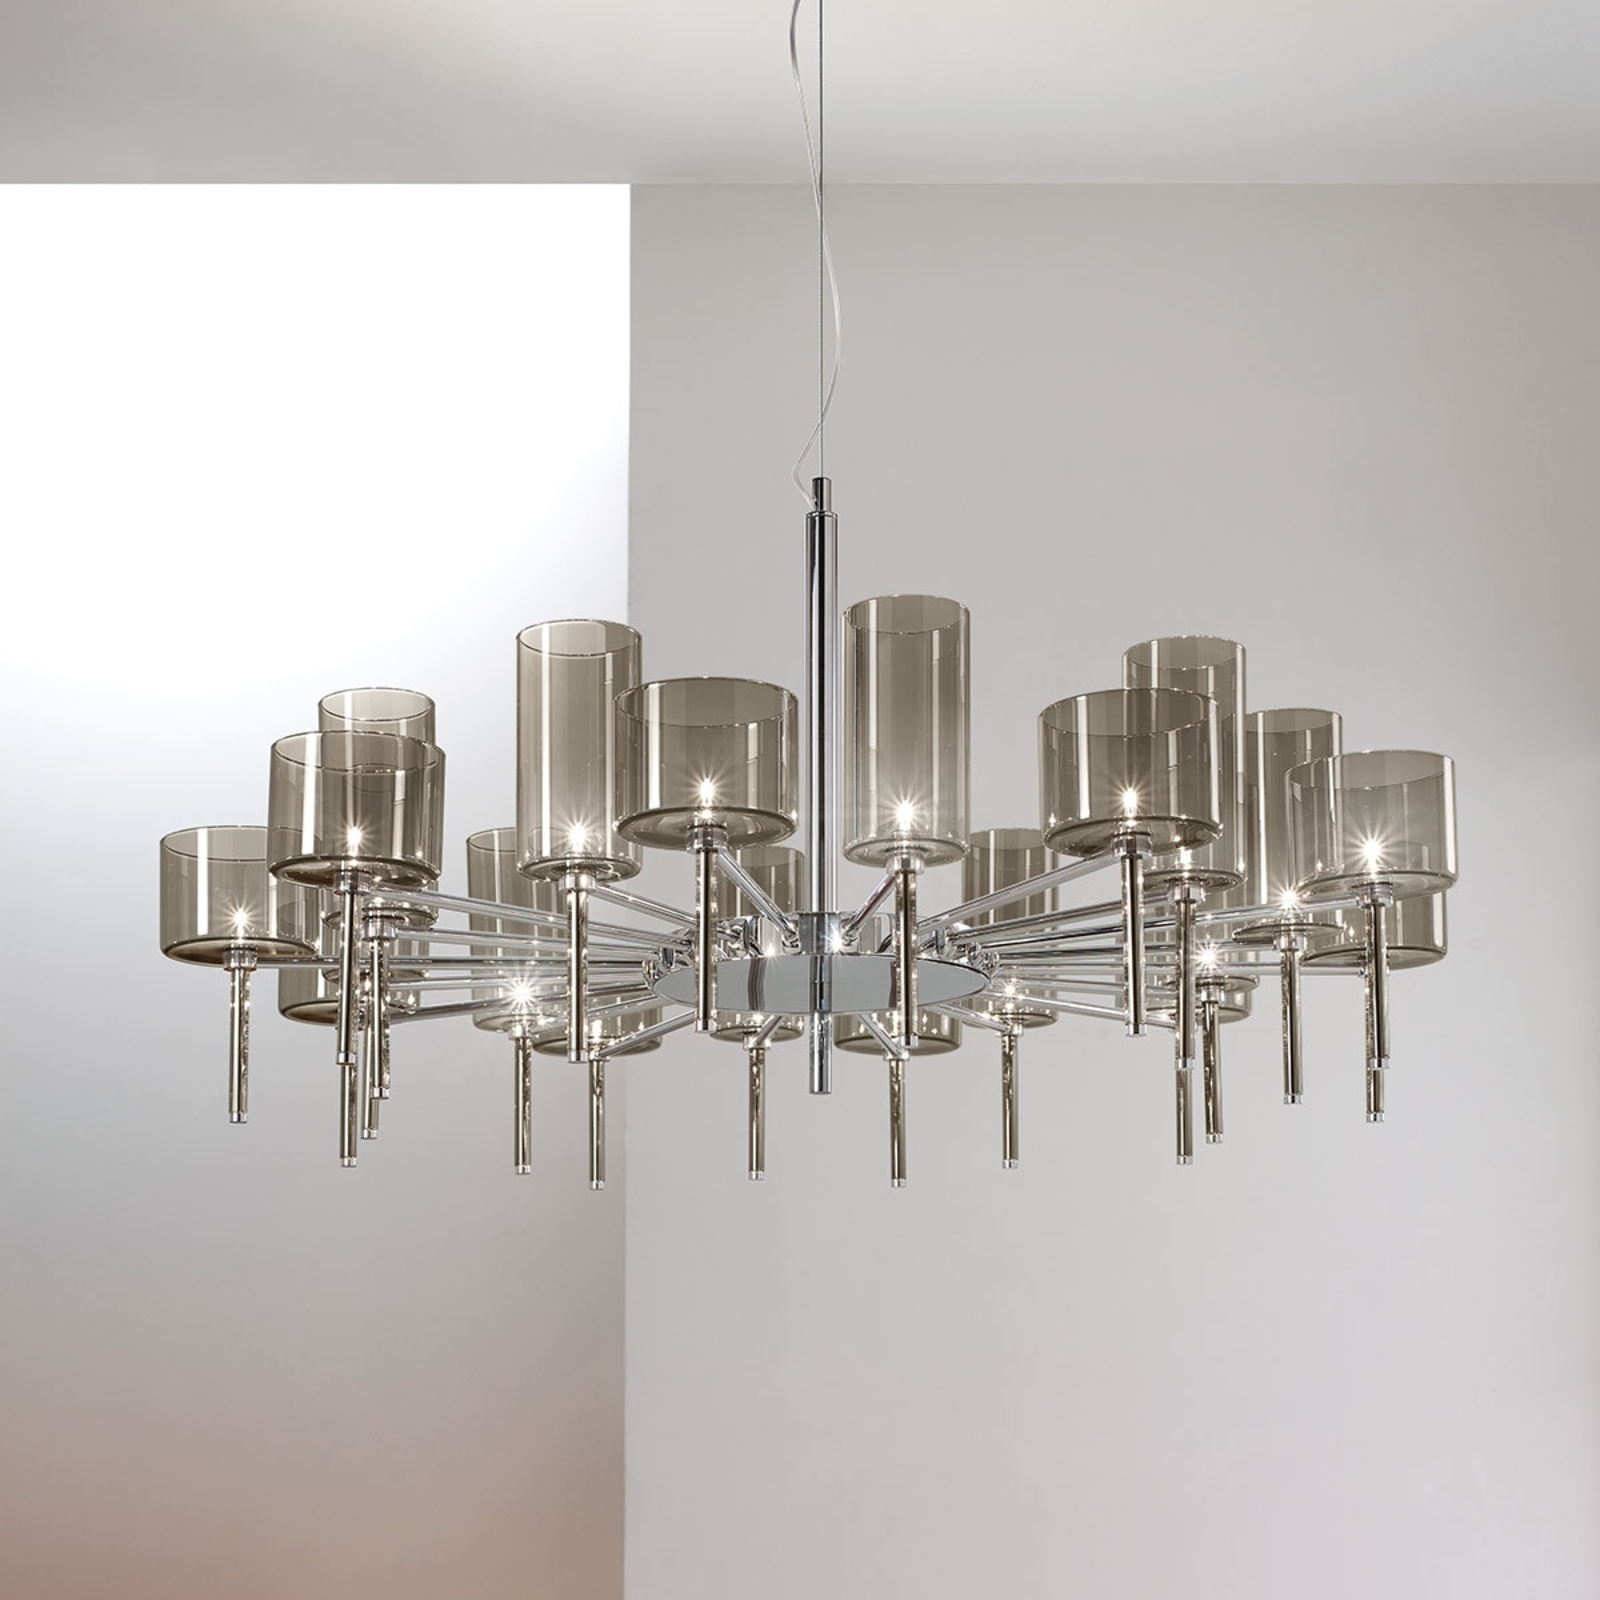 Designer chandelier Spillray with glass shades